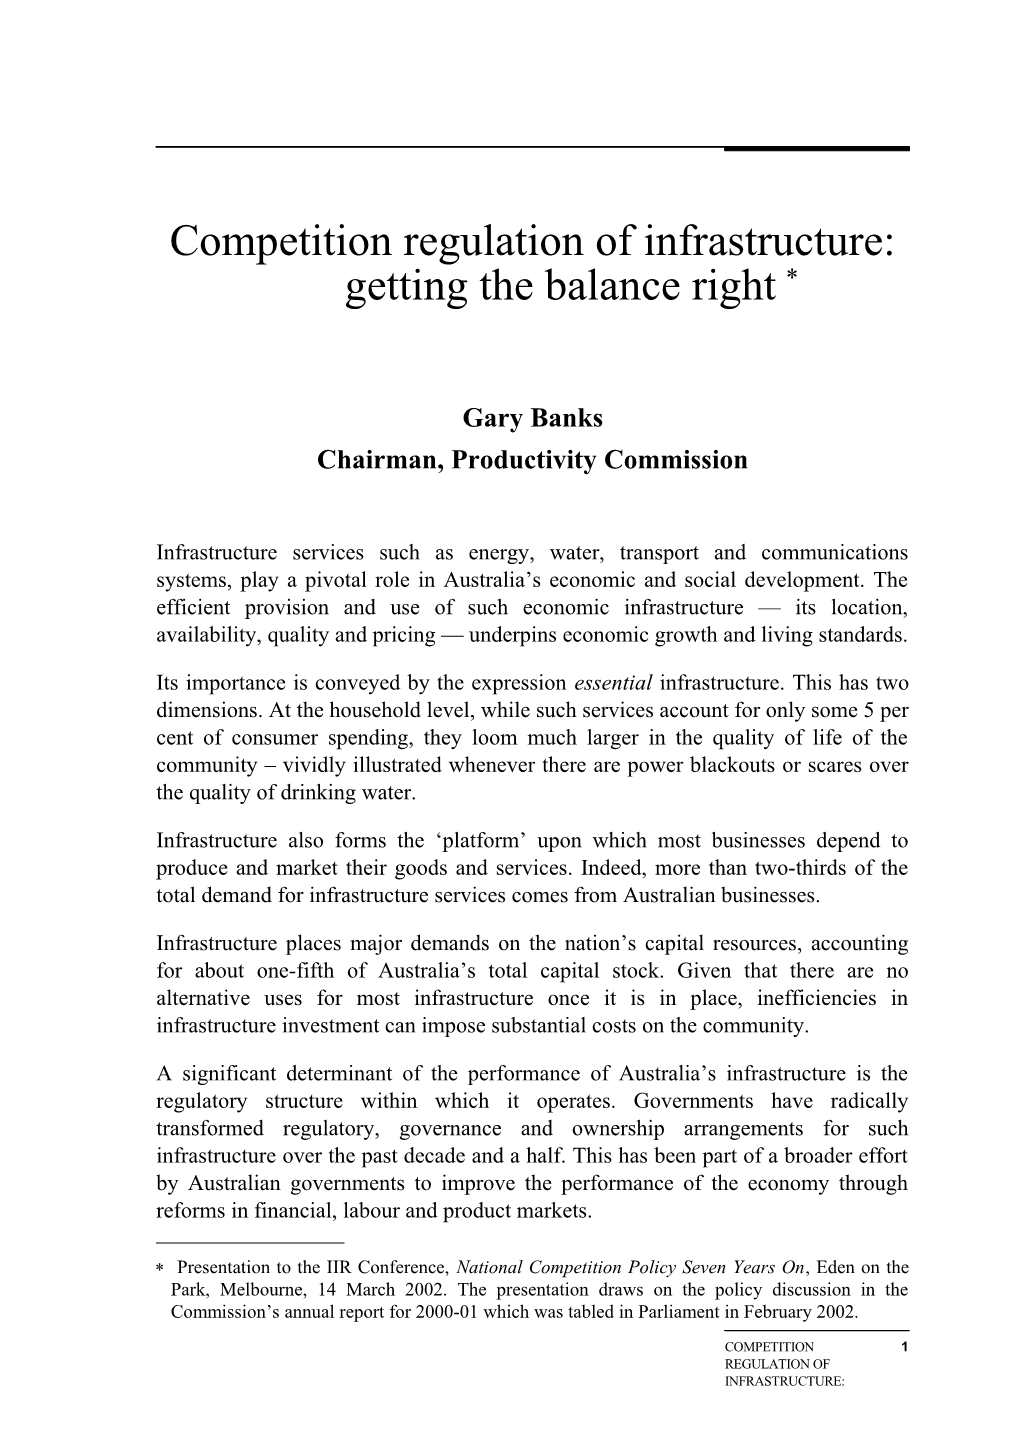 Competition Regulation of Infrastructure: Have We Got the Balance Right